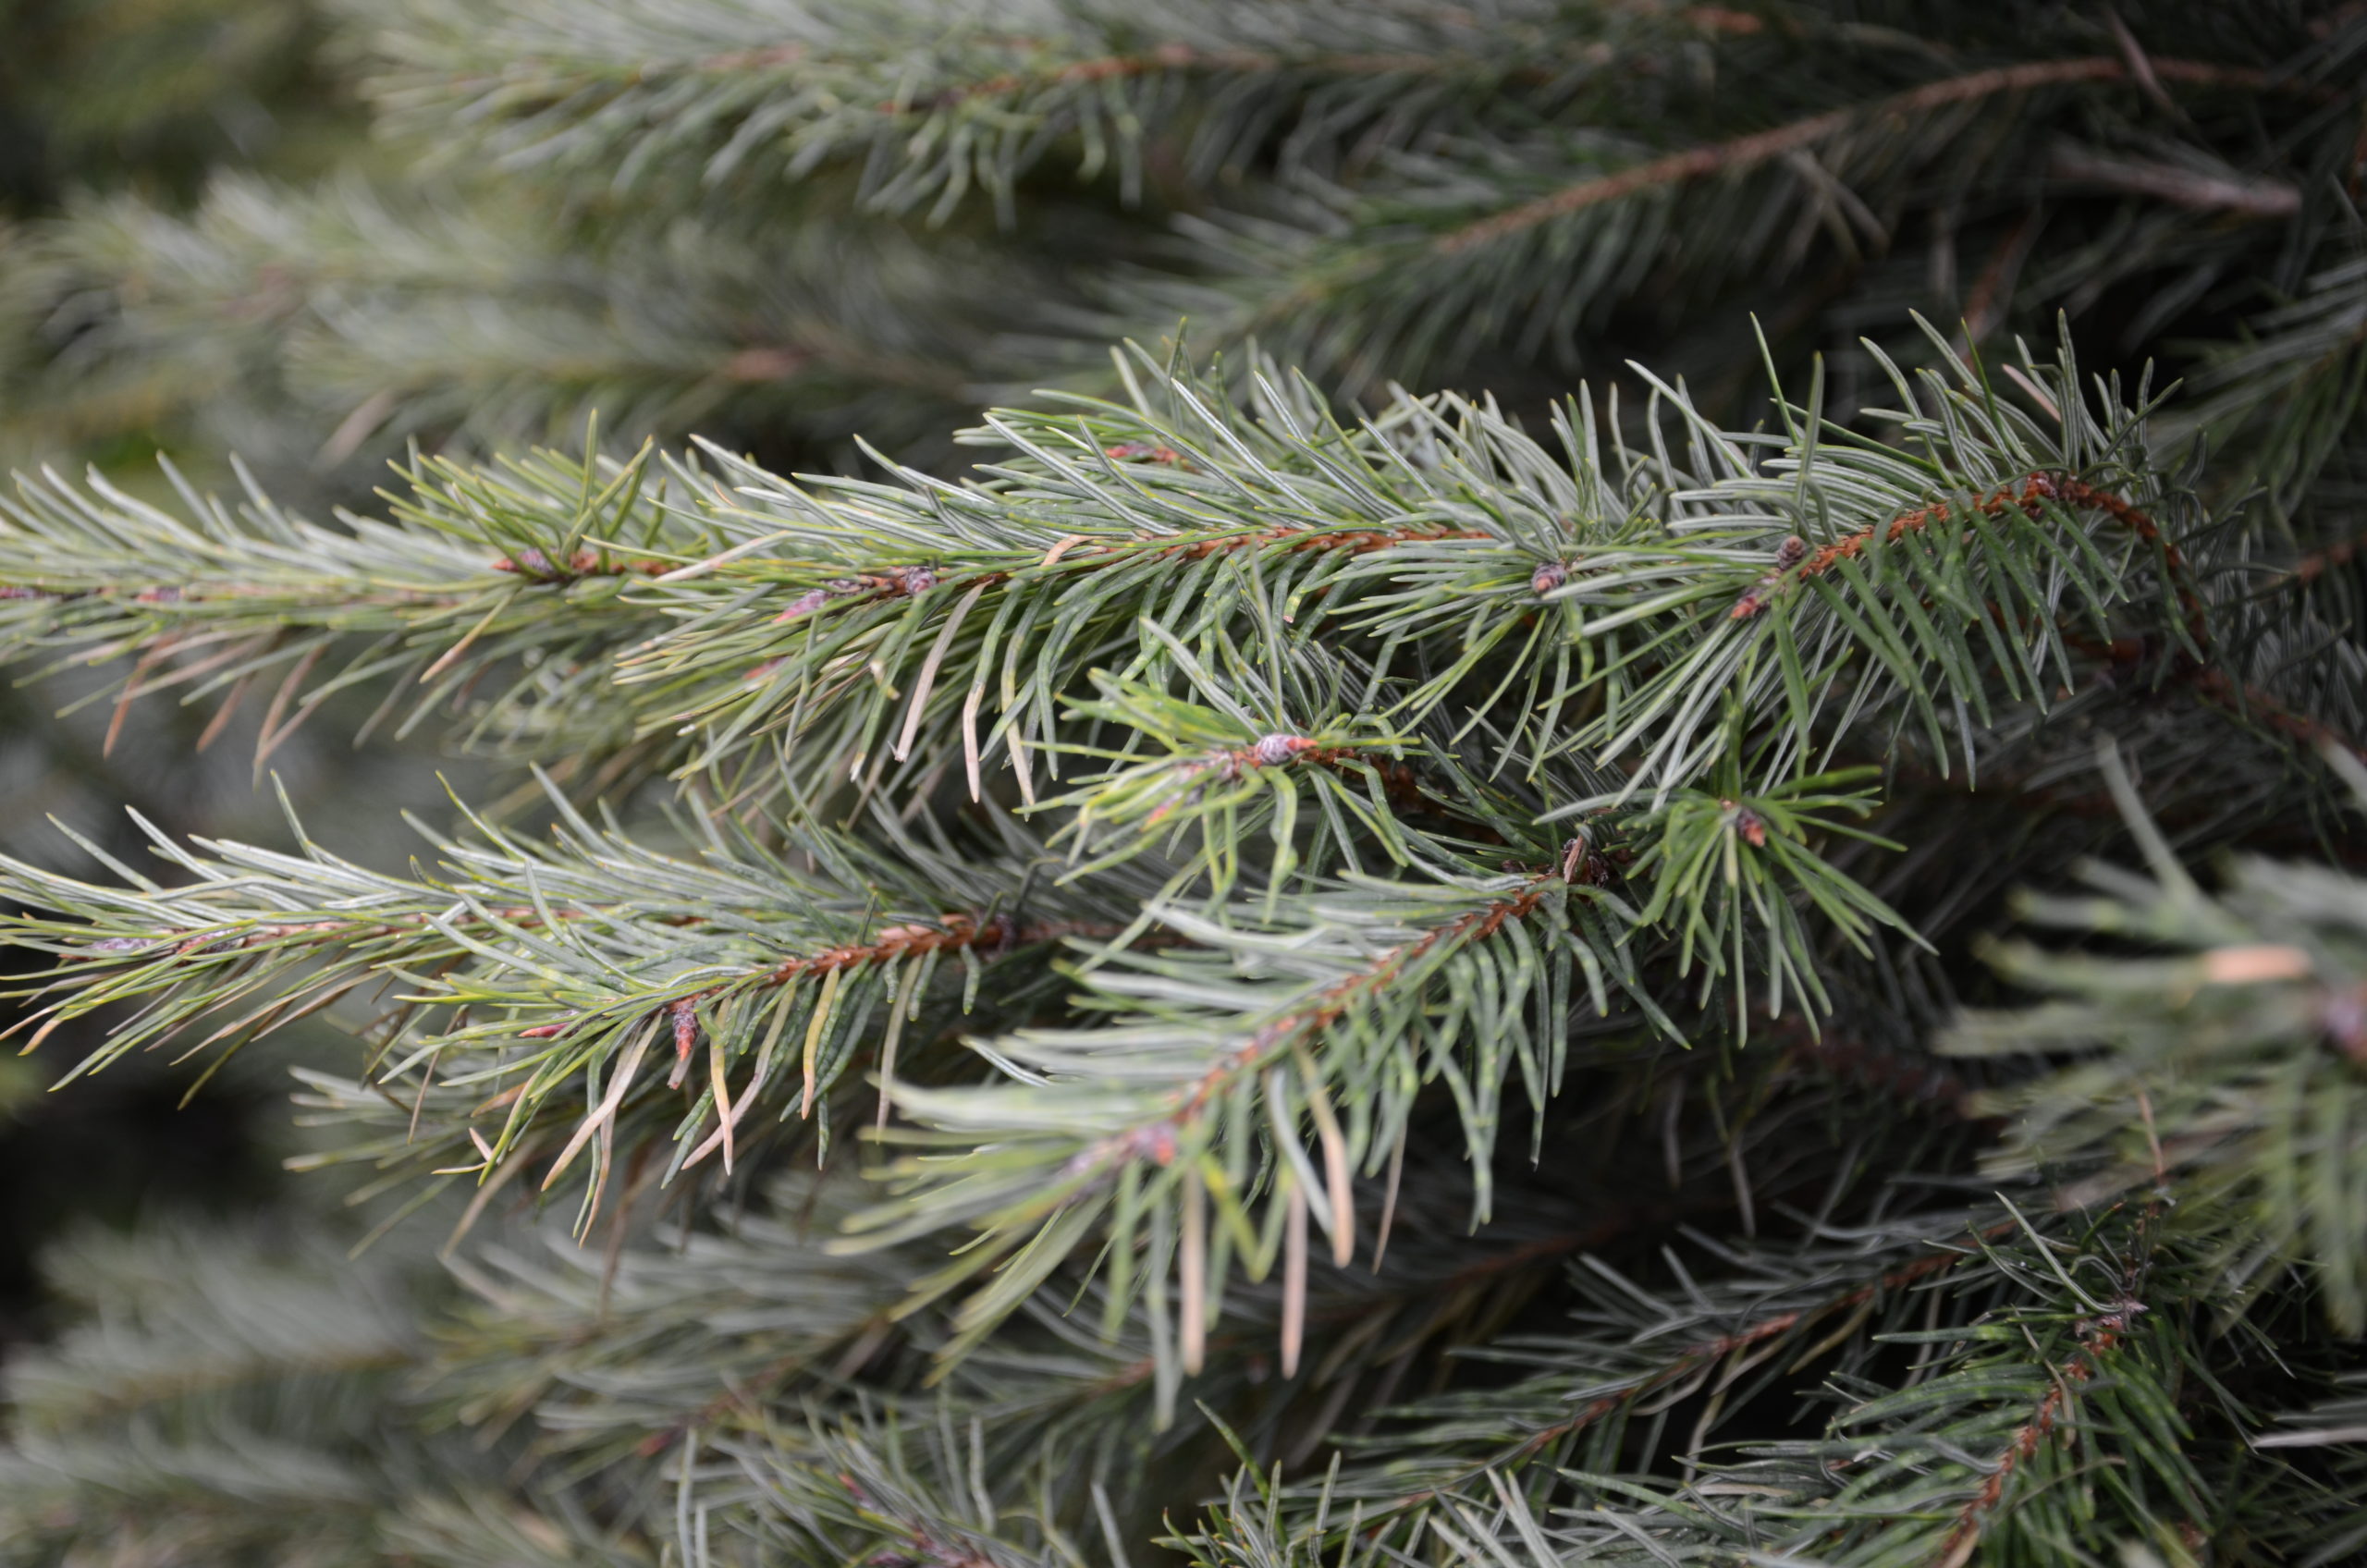 Douglas fir stem. This fir is also native to the western part of the country. Its needles have a classic Christmas tree scent that’s described as inviting and refreshing. An essential oil is made from it.